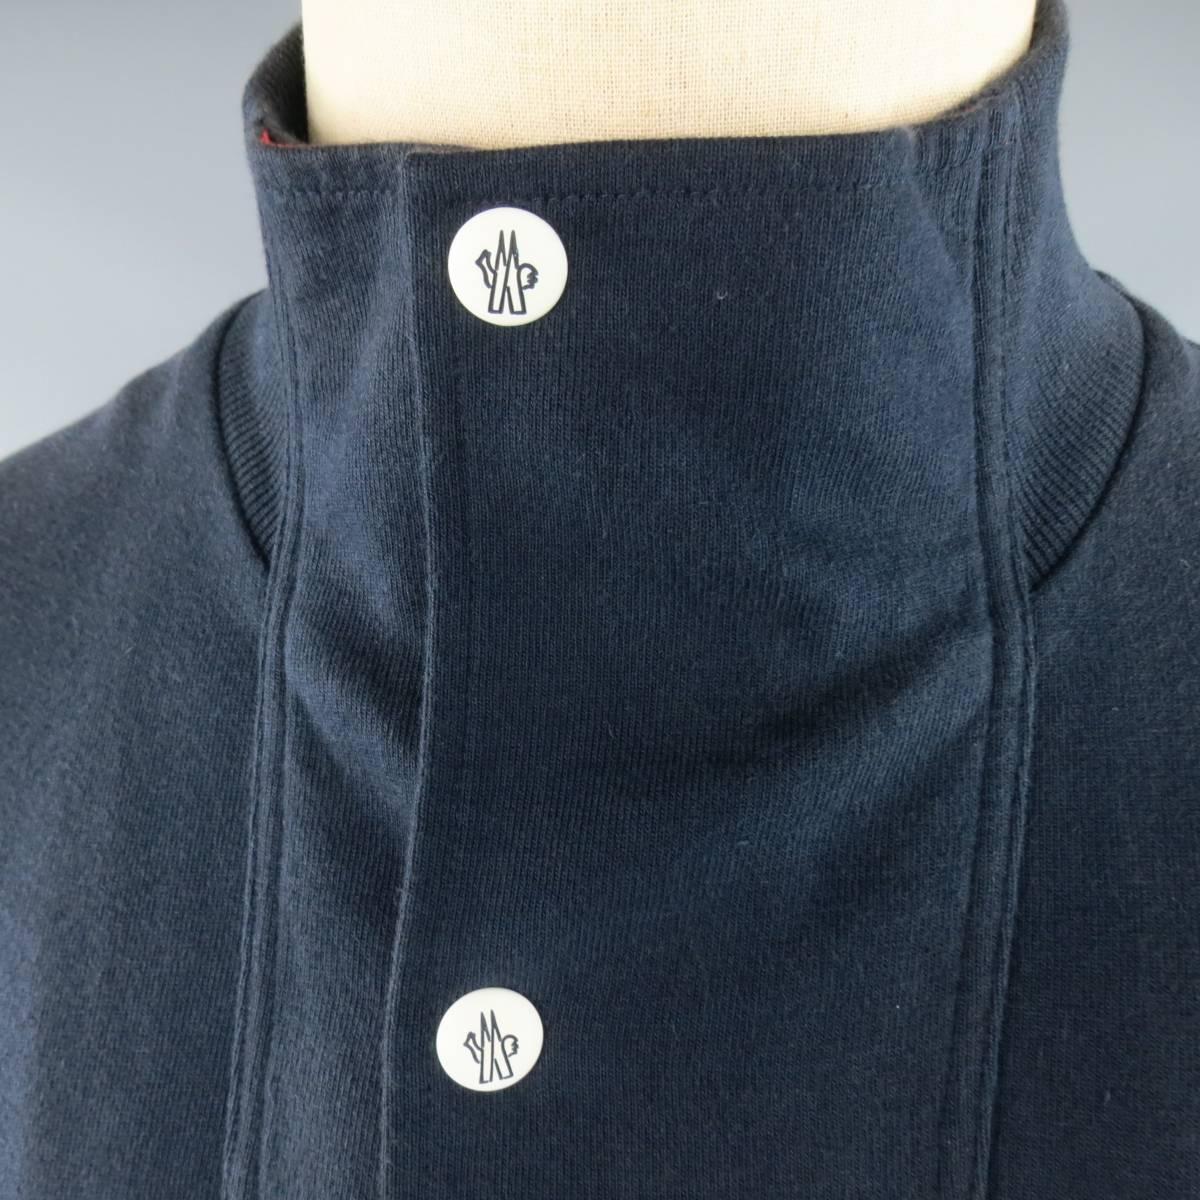 MONCLER GAMME BLEU jacket in a navy blue cotton jersey featuring double zip pockets with white logo tabs, zip up front, and high collar with snap placket and red lining. Fading and wear throughout and discoloration on collar. As-is. Made in Italy.
